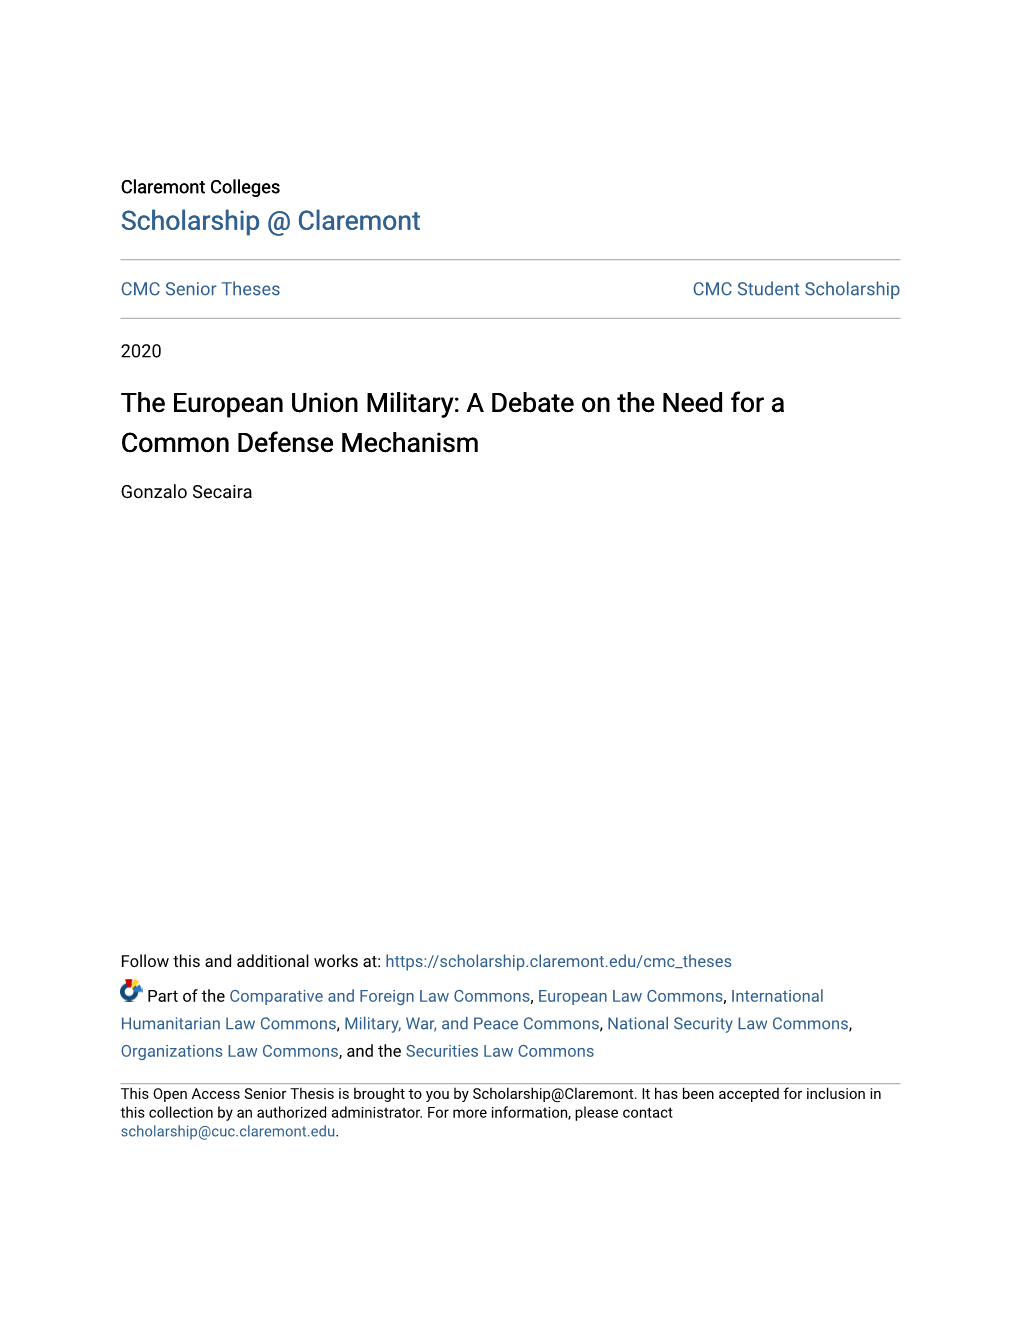 The European Union Military: a Debate on the Need for a Common Defense Mechanism